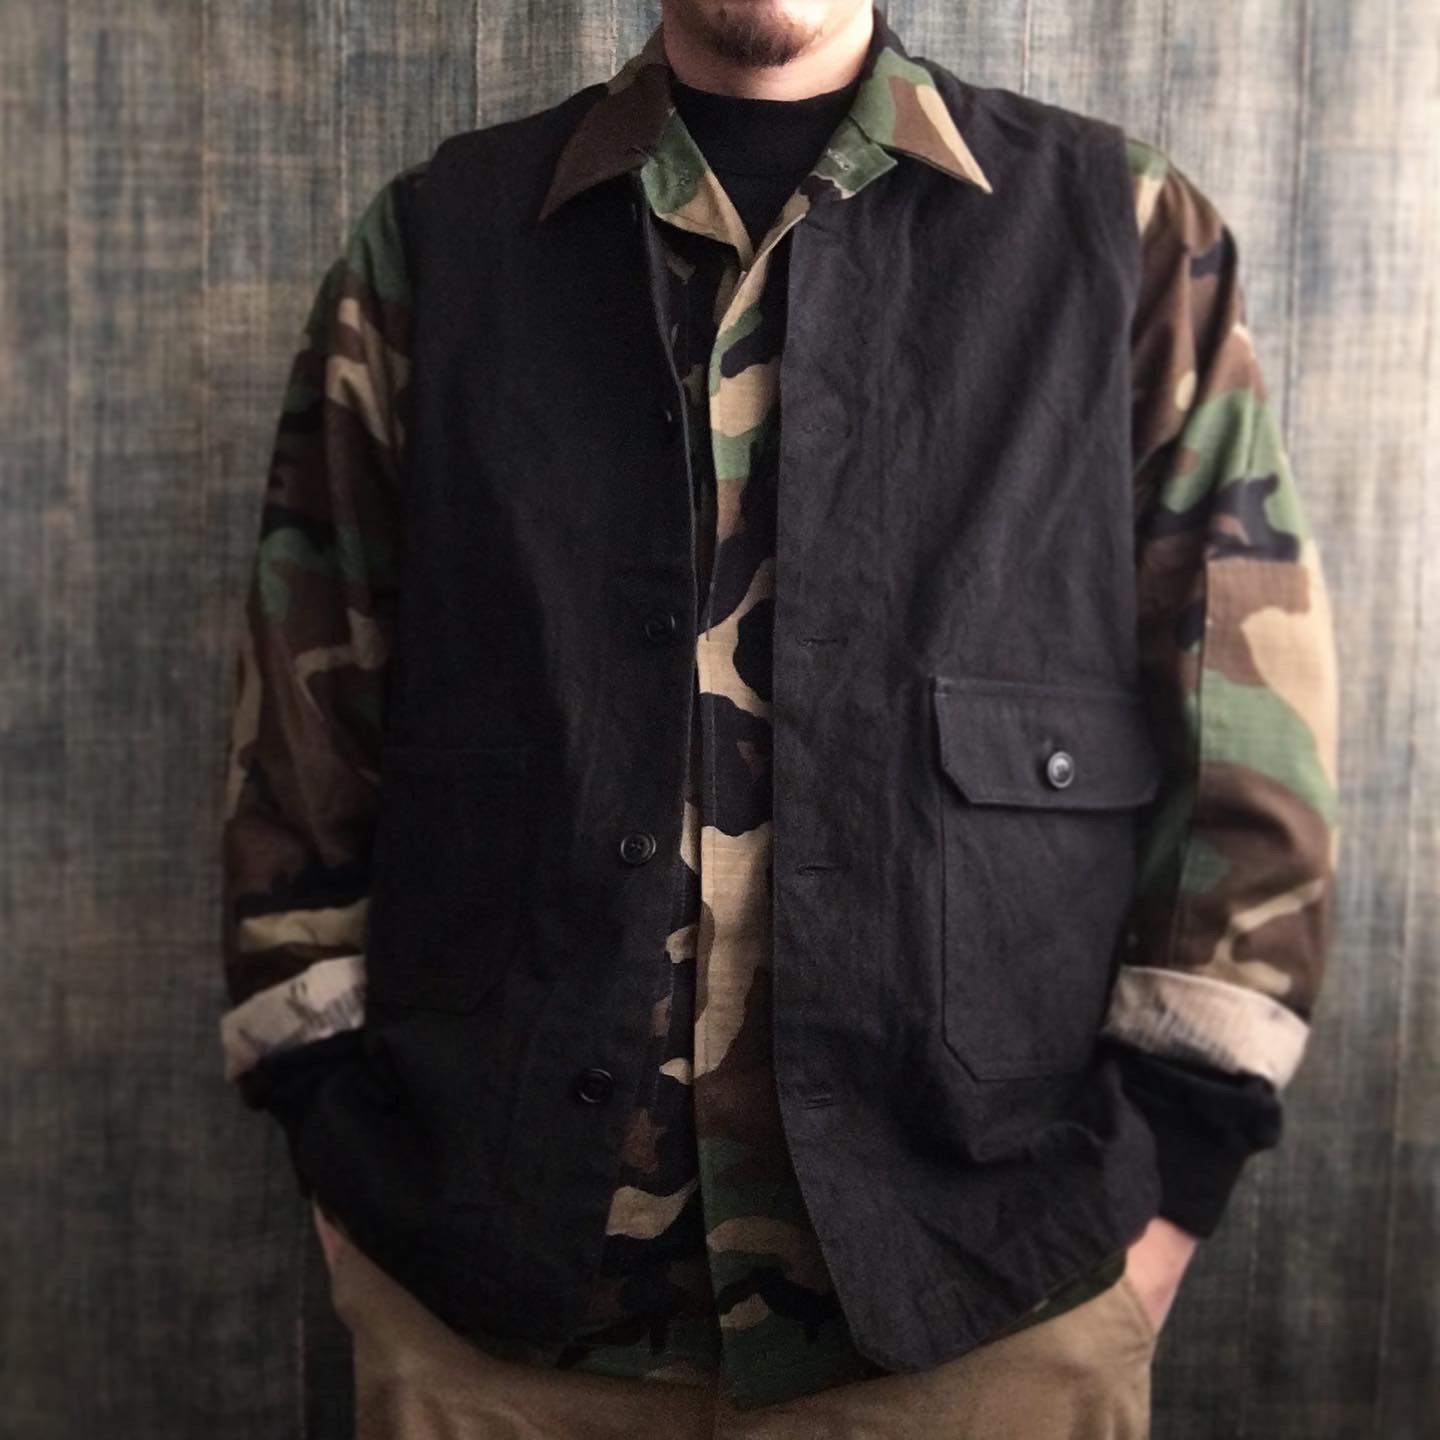 Read more about the article 【weac.】Hunting vest / 武骨なベストが登場です。